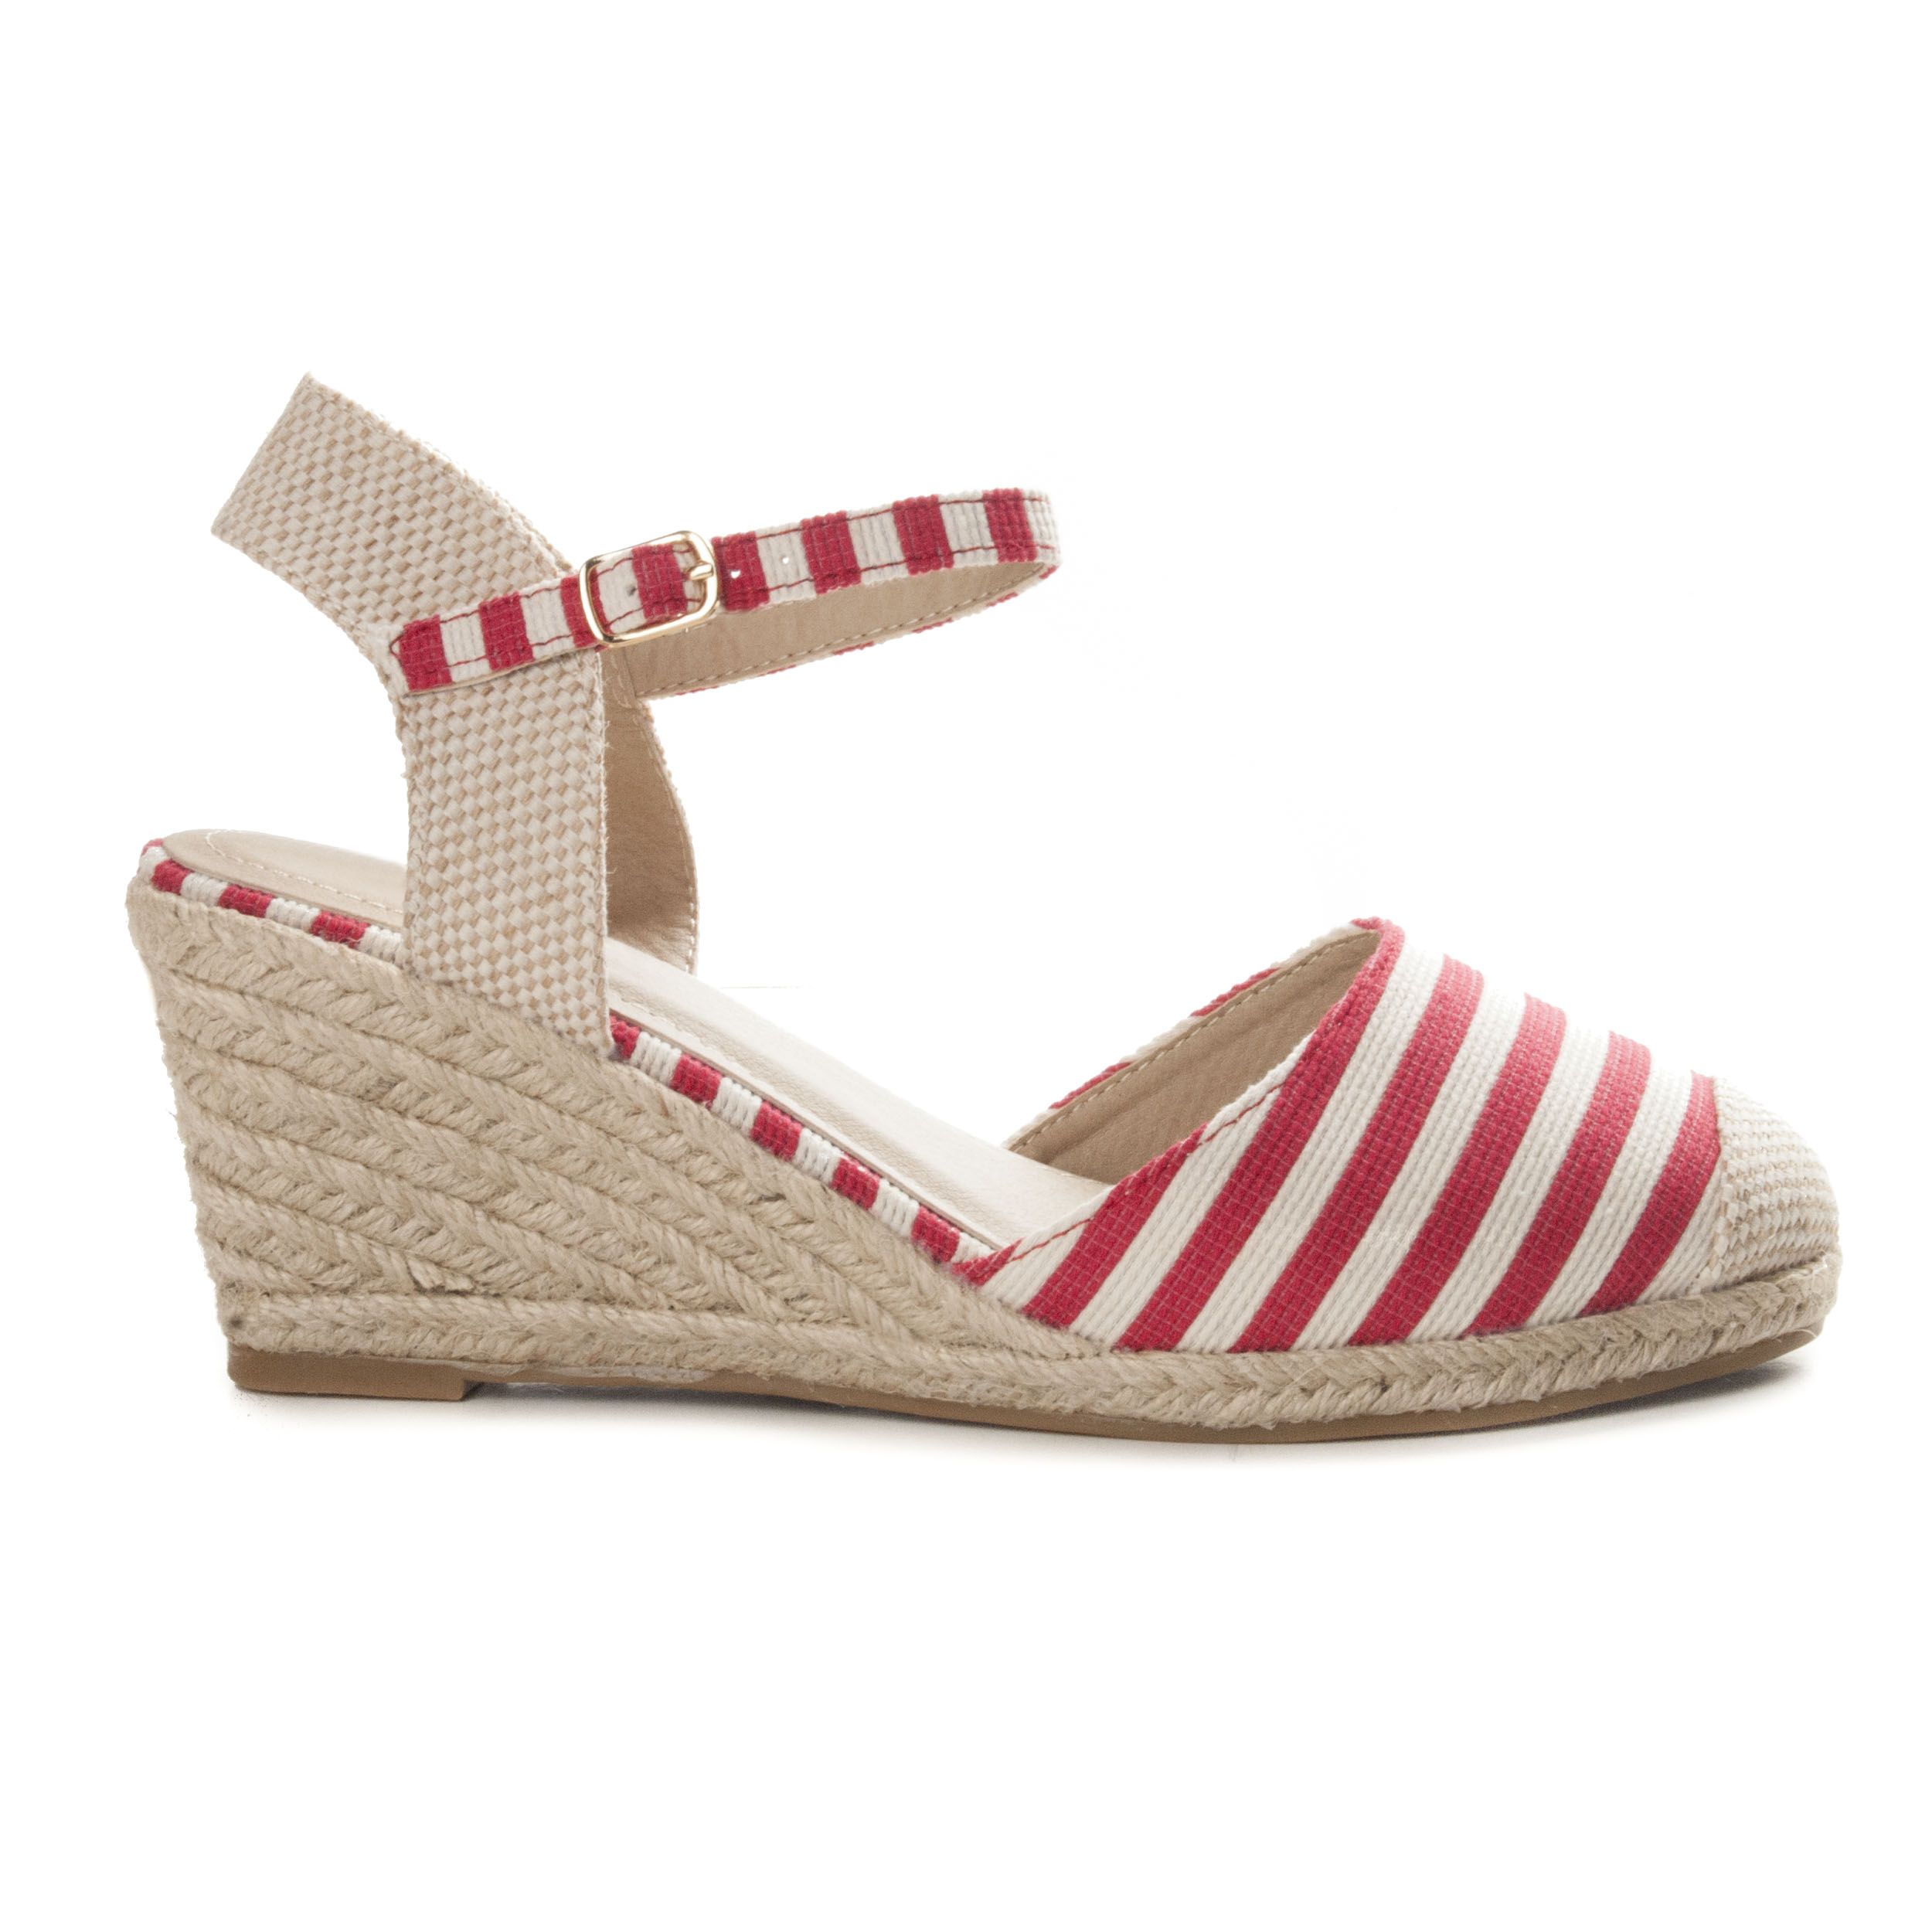 Montevita Ankle Strap Wedge Espadrille in Red